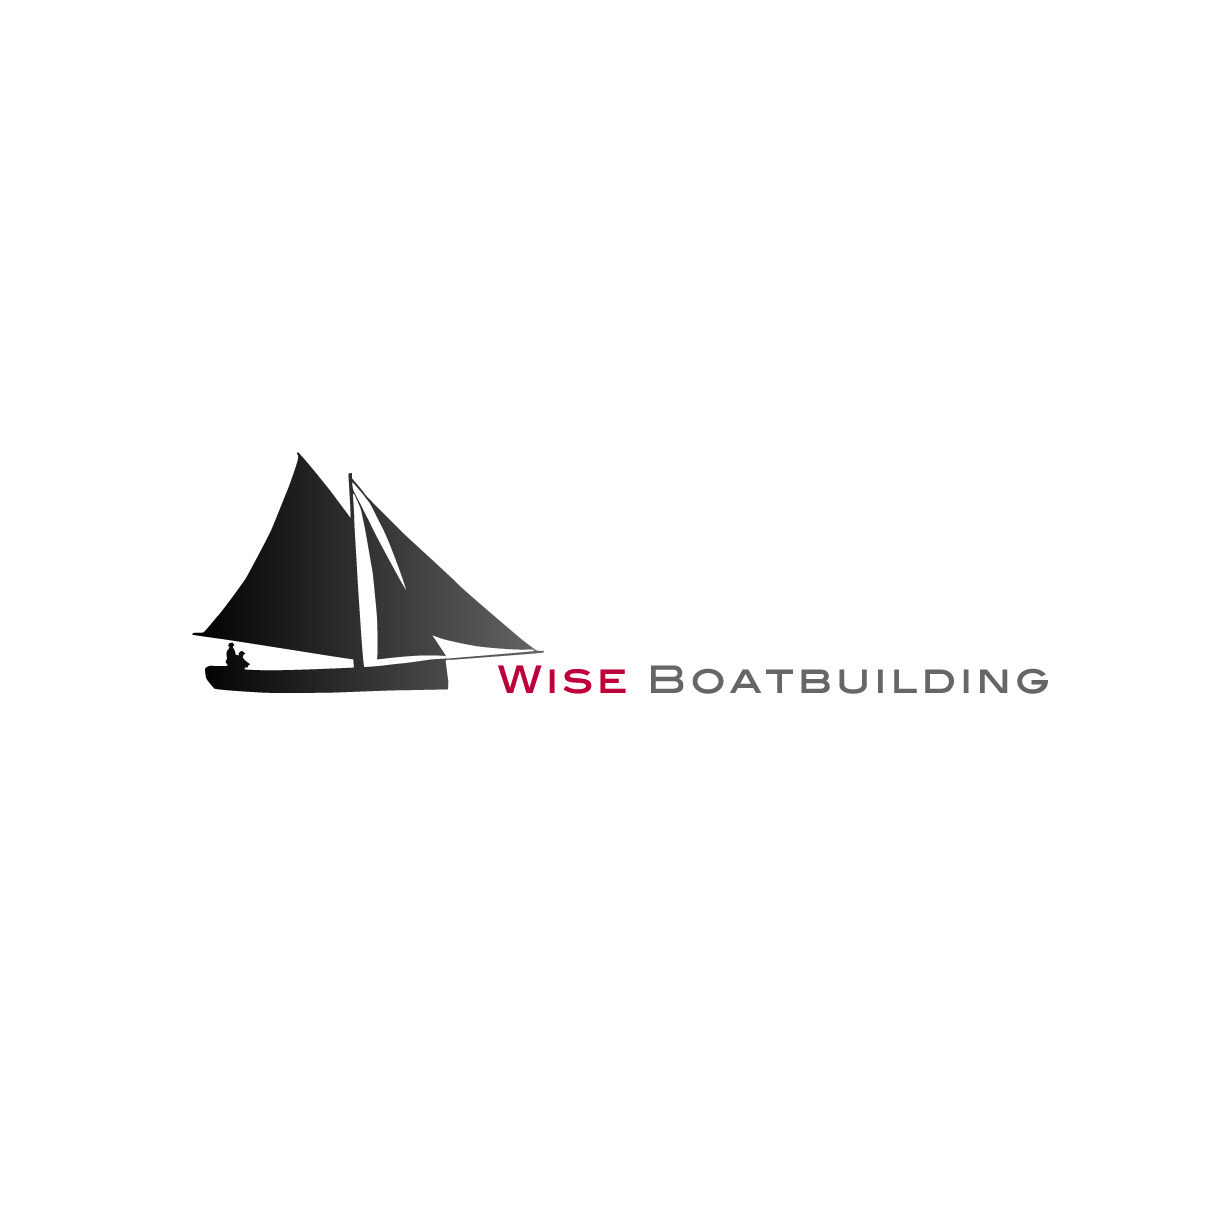 Wise Boatbuilding